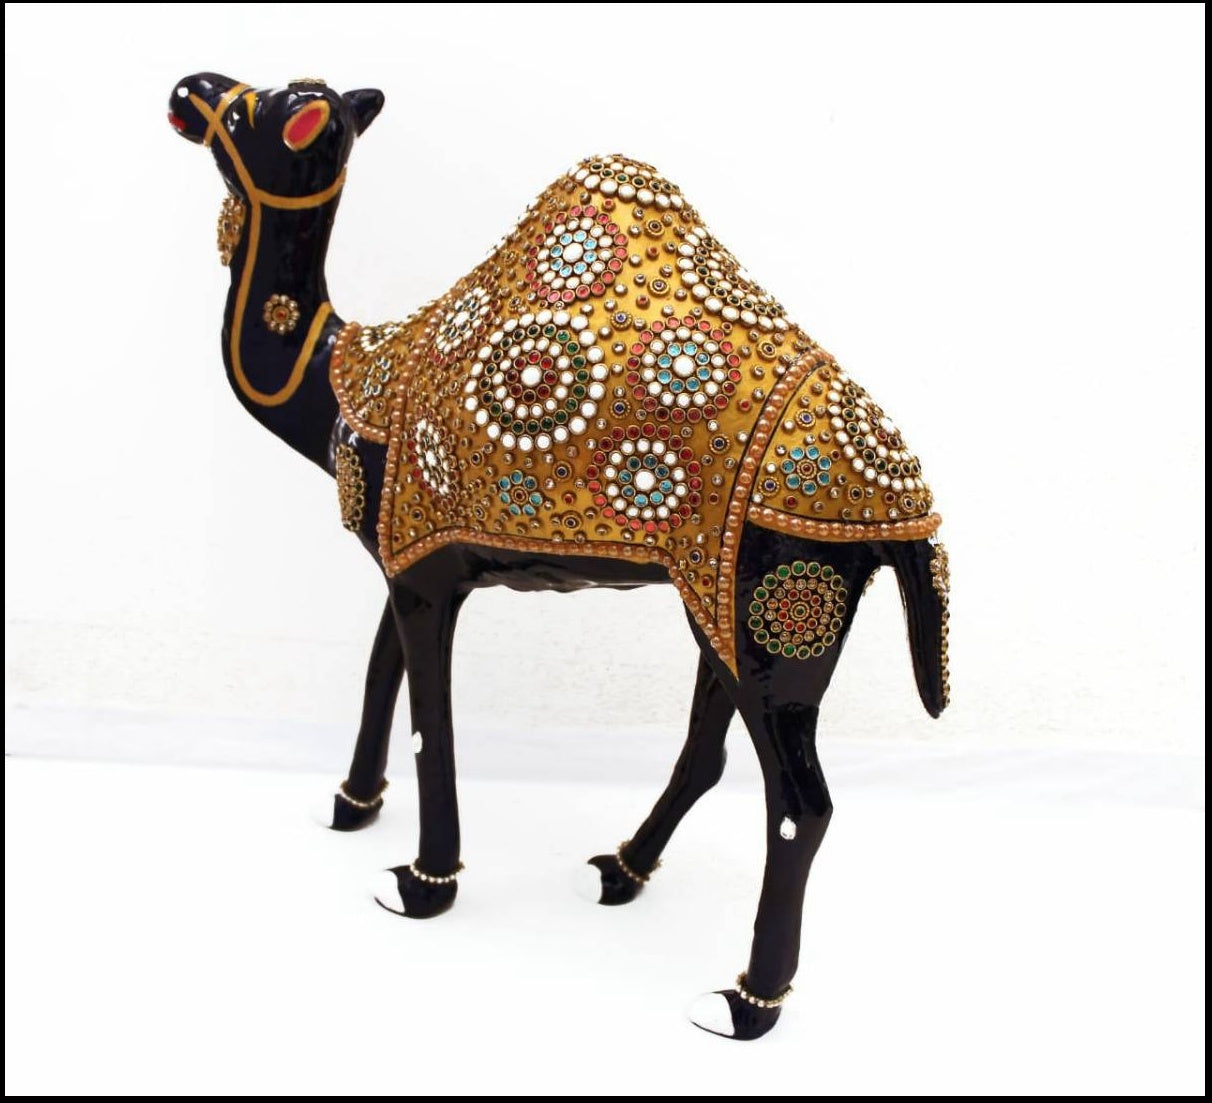 Black Metal Jewellery Stone Camel Figurine Of Sizes 12inch and 8inch, available exclusively on Shahi Sajawat India, the world of home decor products. Best trendy home decor, living room, kitchen and bathroom decor ideas of 2020.